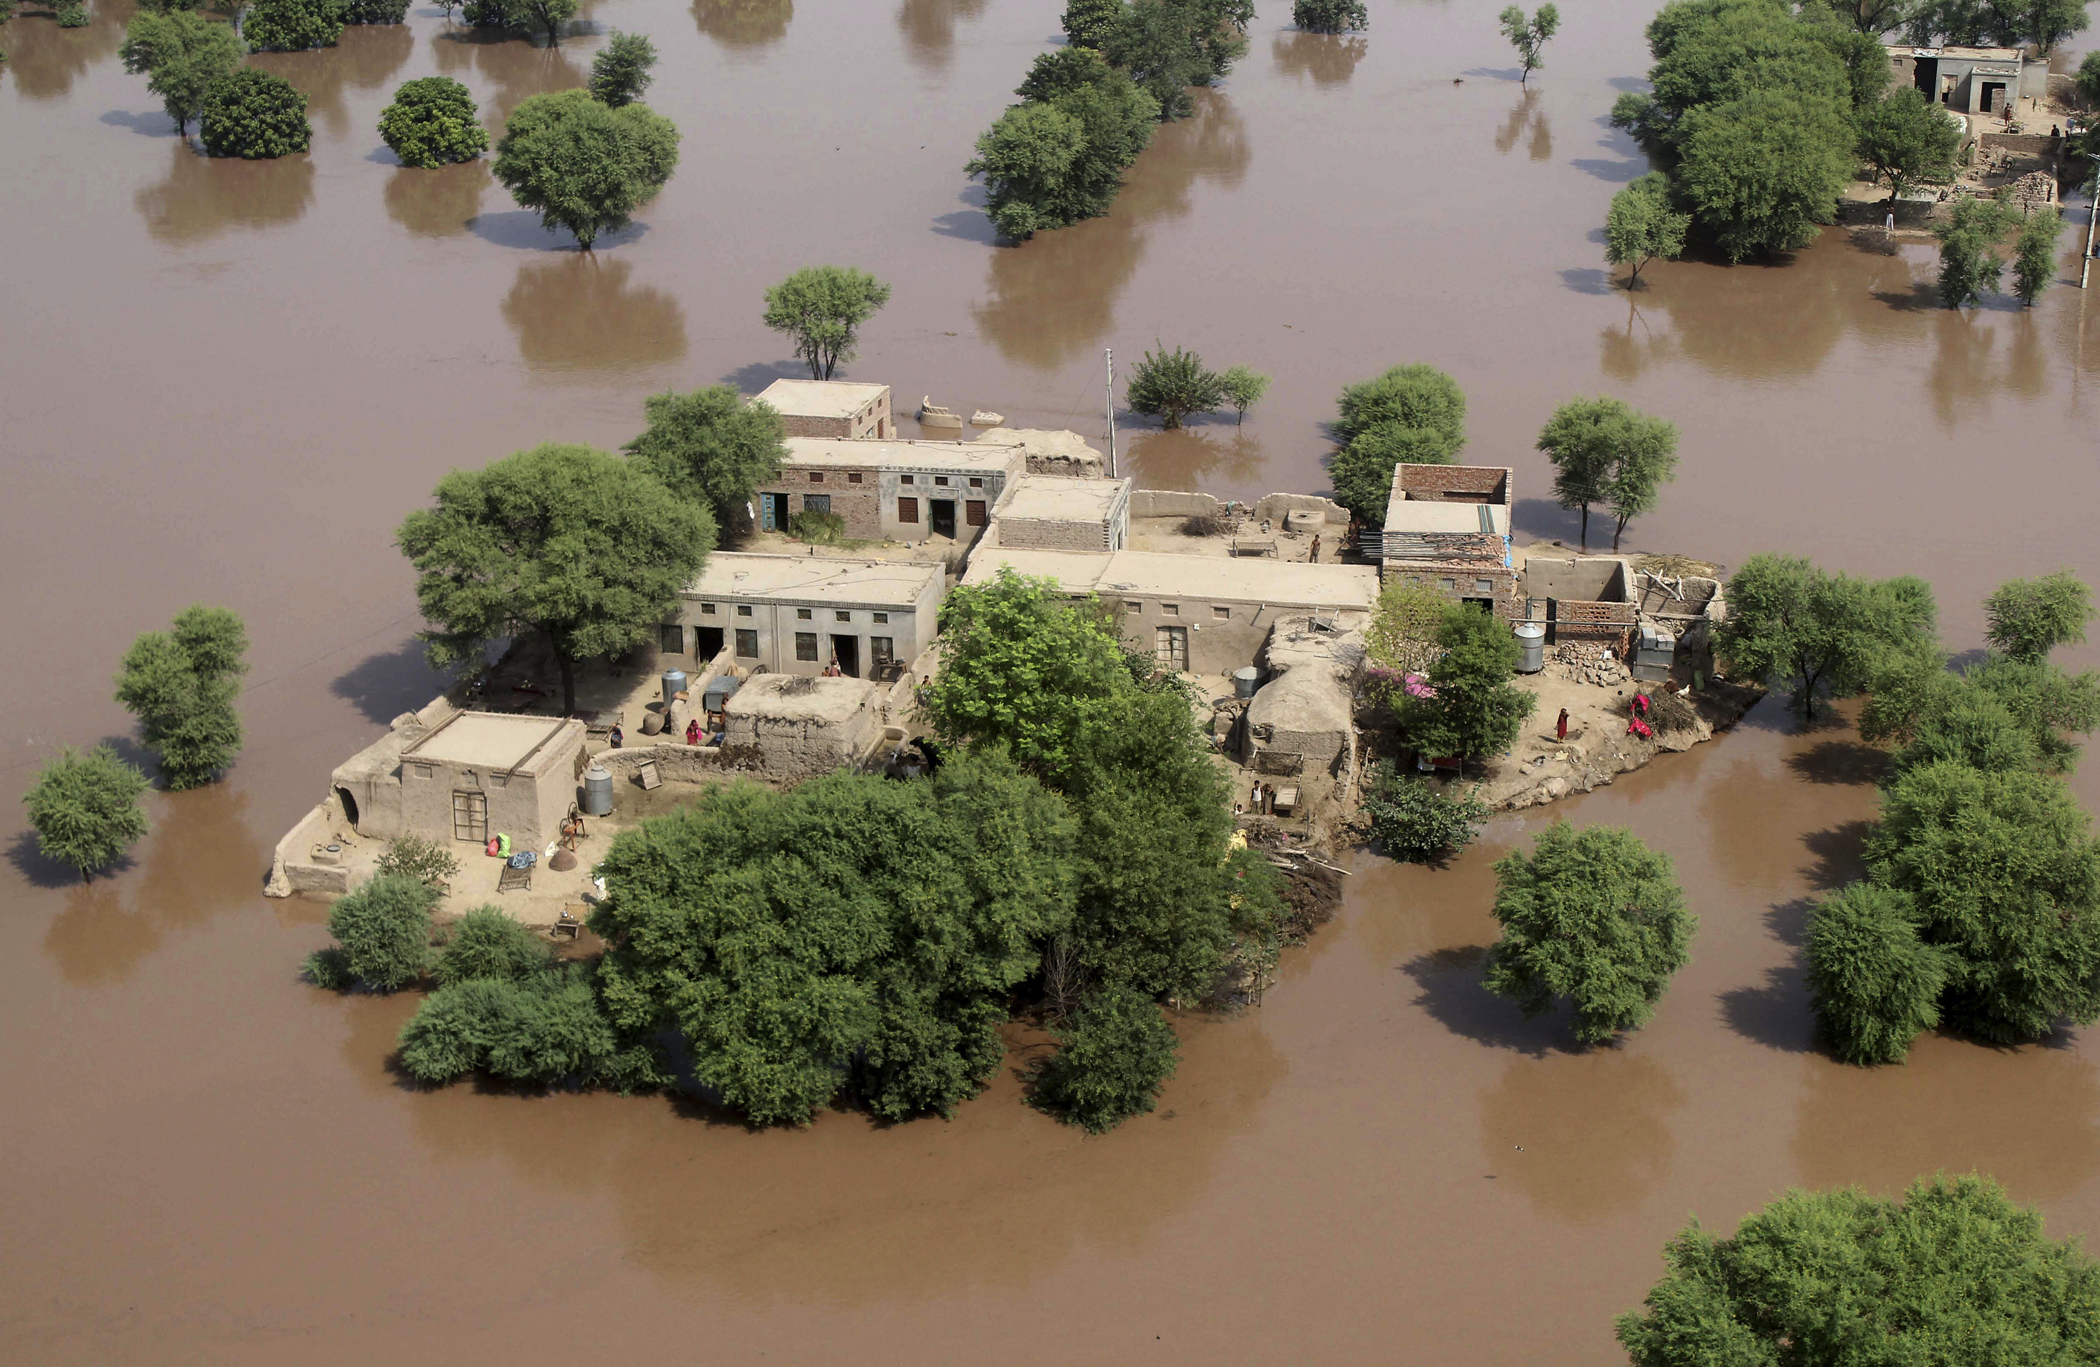 An aerial view shows houses surrounded by flood waters in district Multan, Pakistan, Sept. 12, 2014.